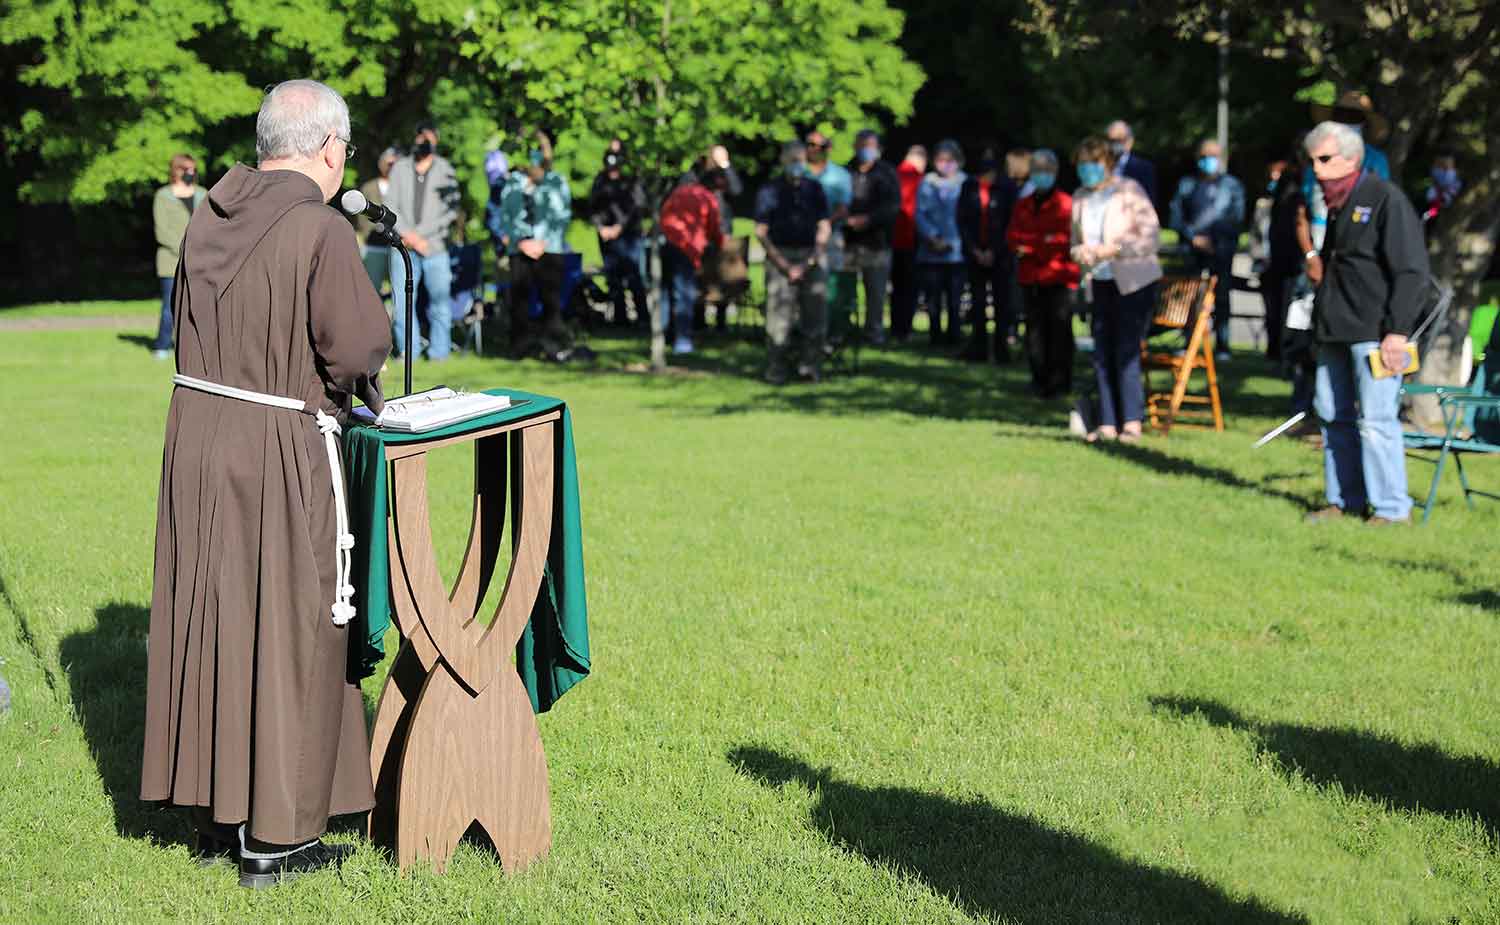 Fr. Tom Zelinski, Capuchin, addresses visitors on the front lawn of the retreat house.